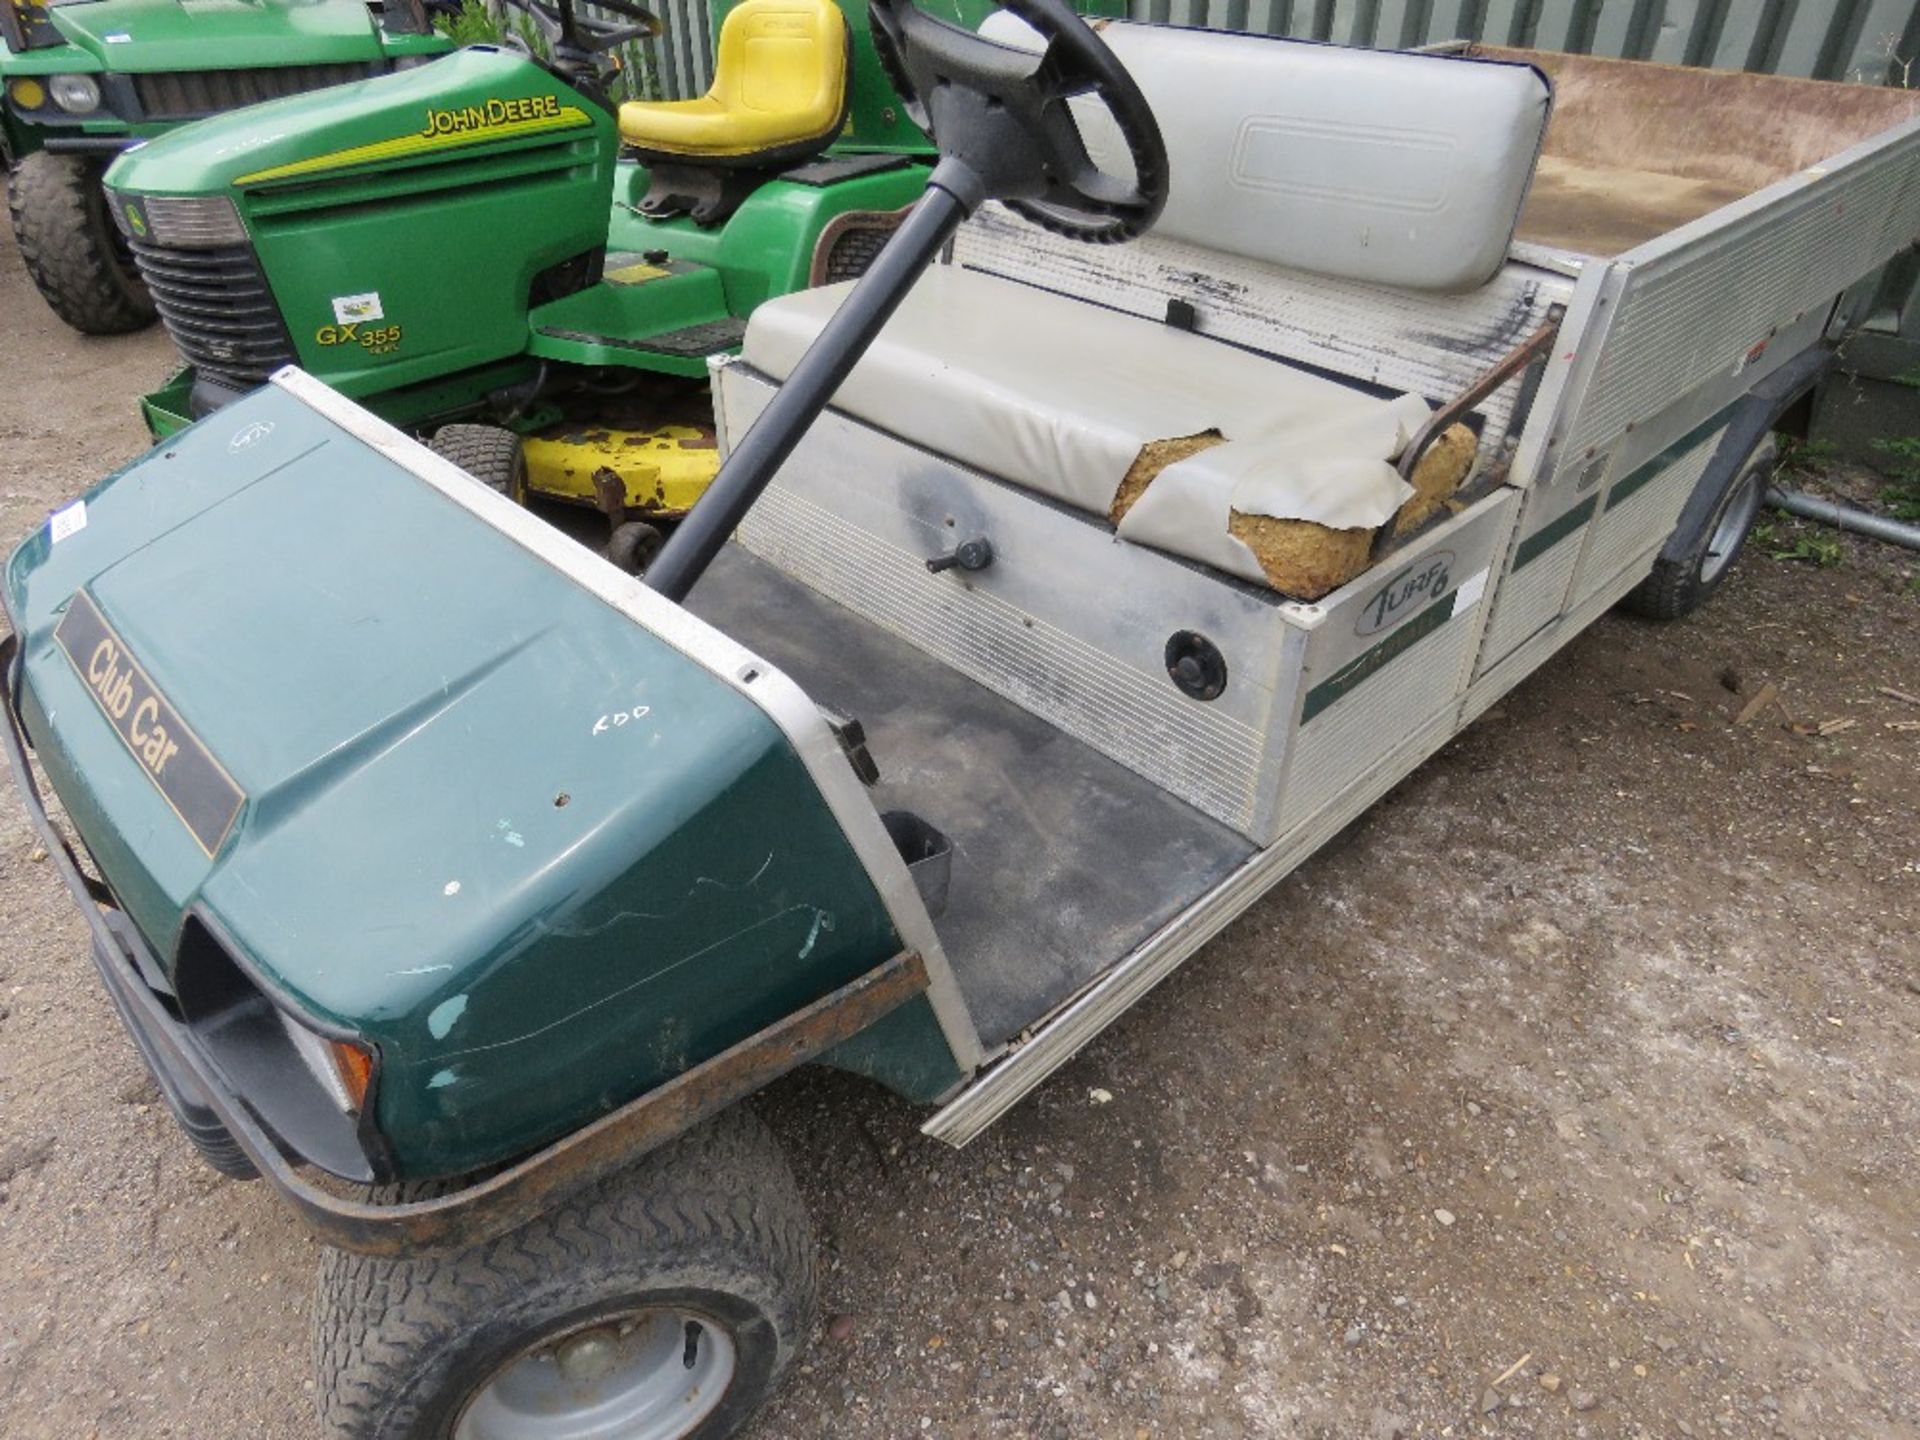 CLUBCAR CARRYALL PETROL UTILITY TRUCK. WHEN TESTED WAS SEEN TO DRIVE, STEER AND BRAKE, - Image 3 of 5